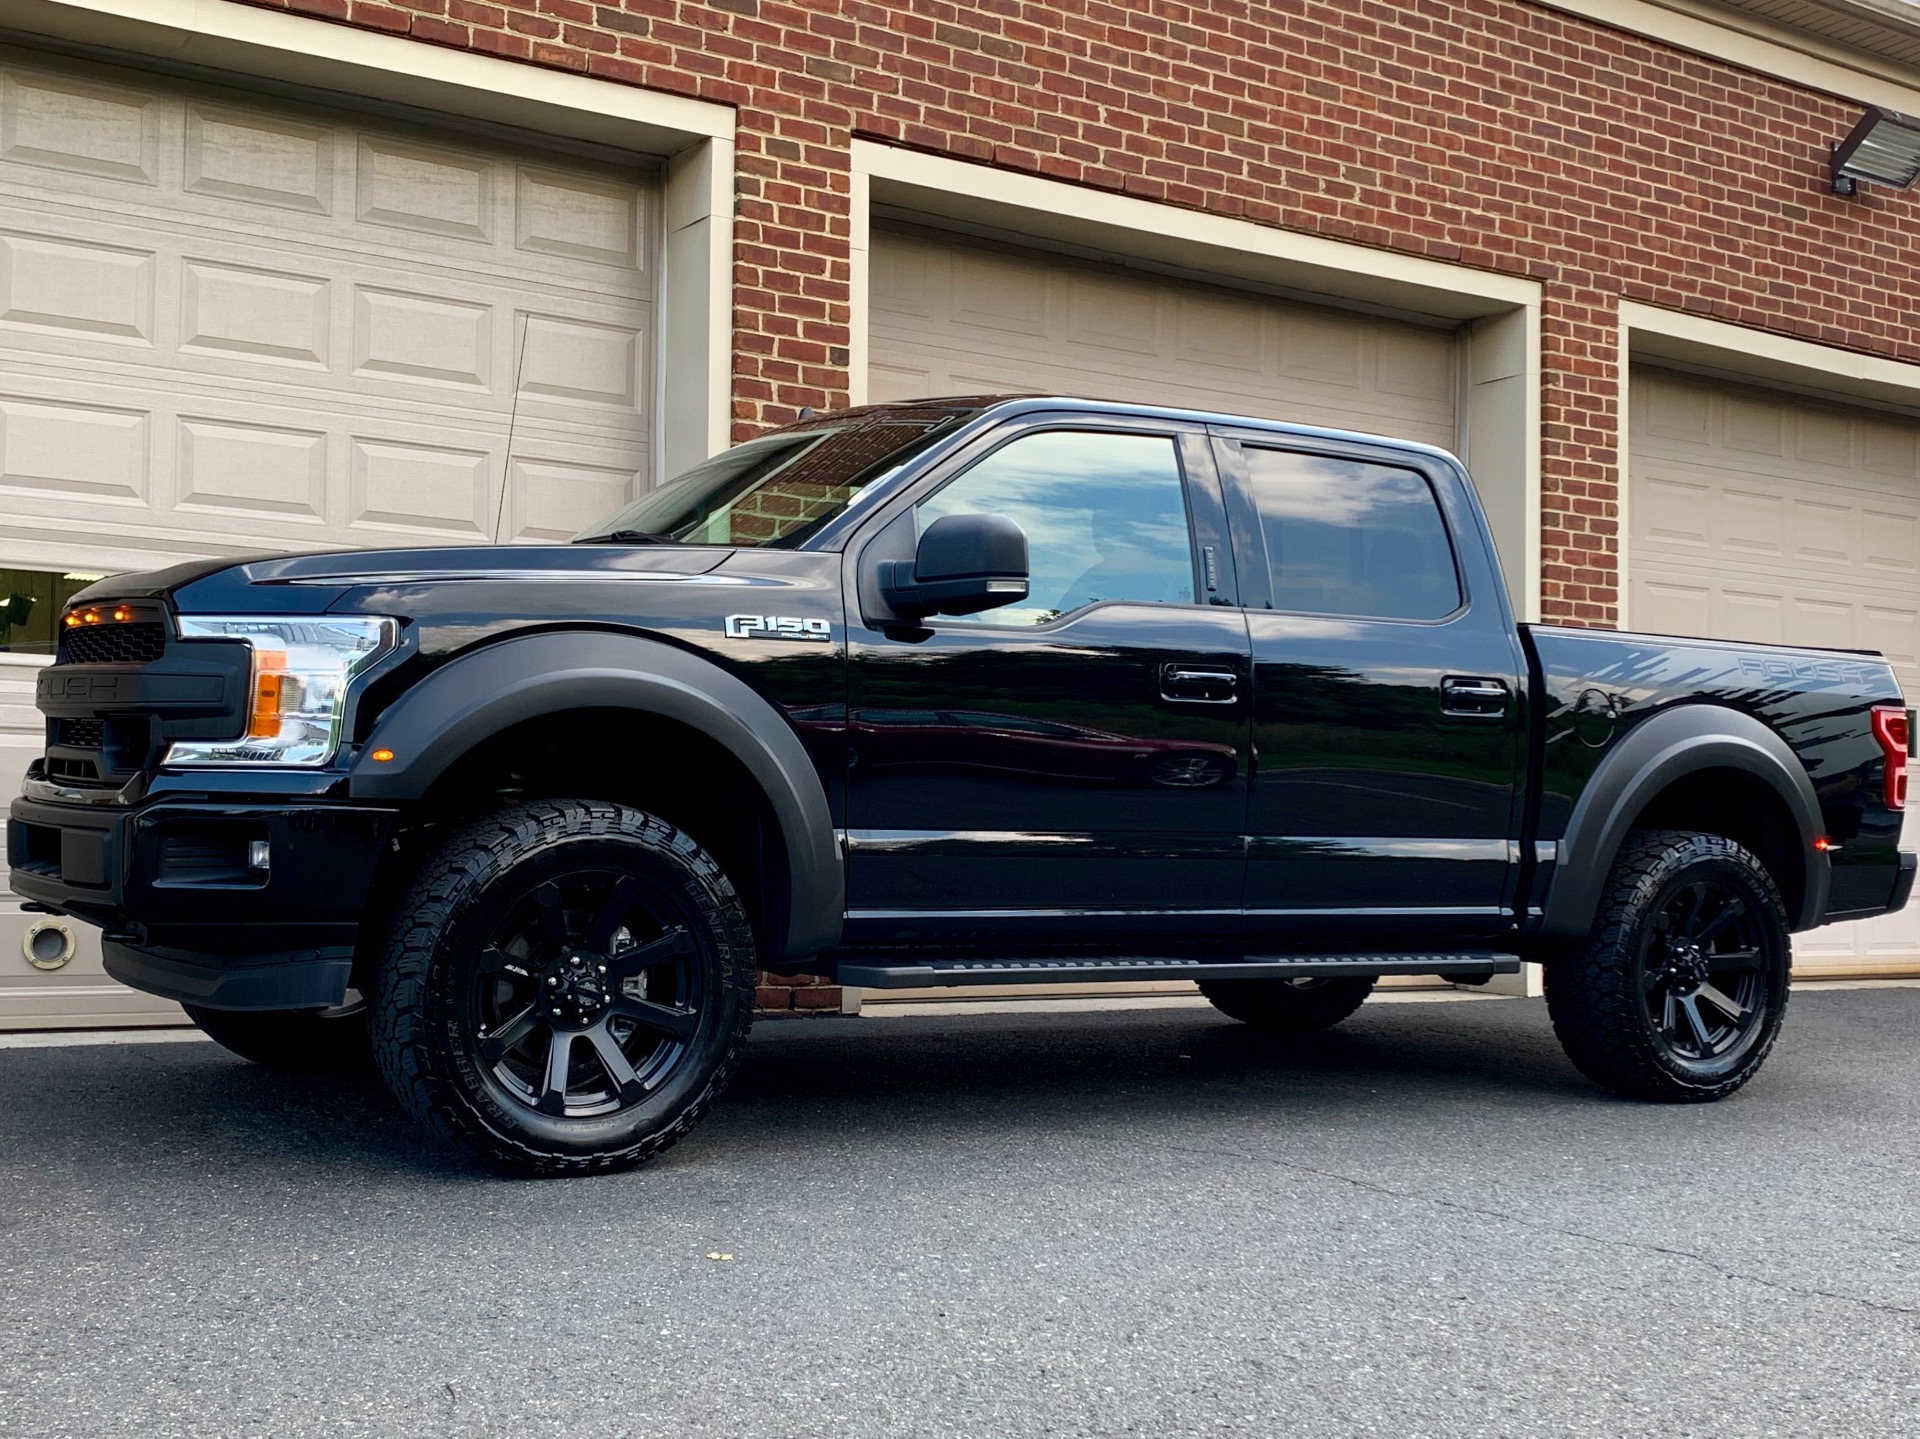 Used-2019-Ford-F-150-Roush.